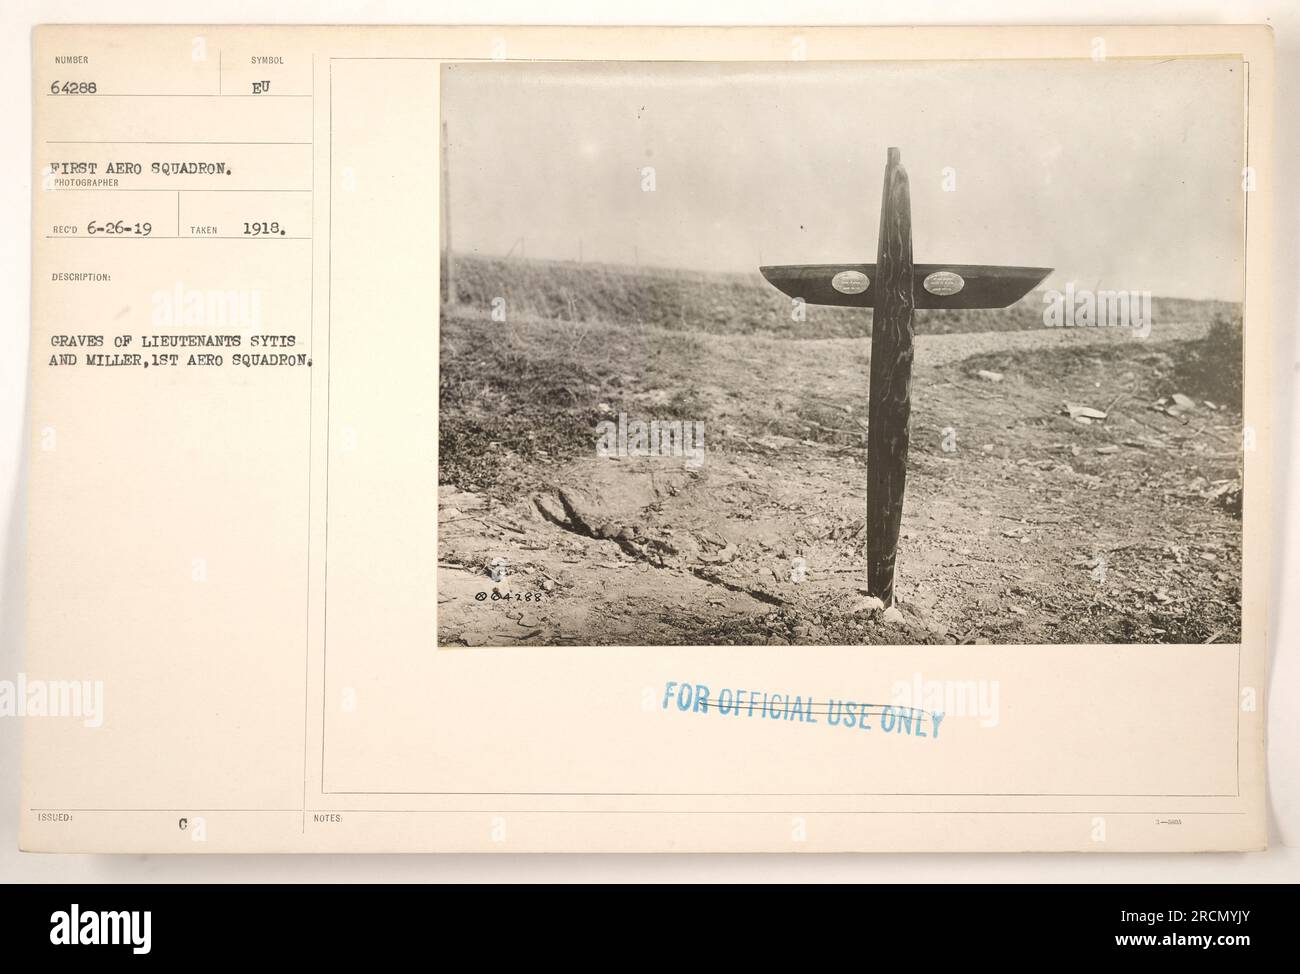 Grave of Lieutenants Sytis and Miller, 1st Aero Squadron, numbered 64288. This photograph, taken in 1918, shows the graves of Lieutenants Sytis and Miller, members of the 1st Aero Squadron. The photographer is RECO, with this image issued in 6-26-19 EU. Note: this image is intended for official use only. Stock Photo